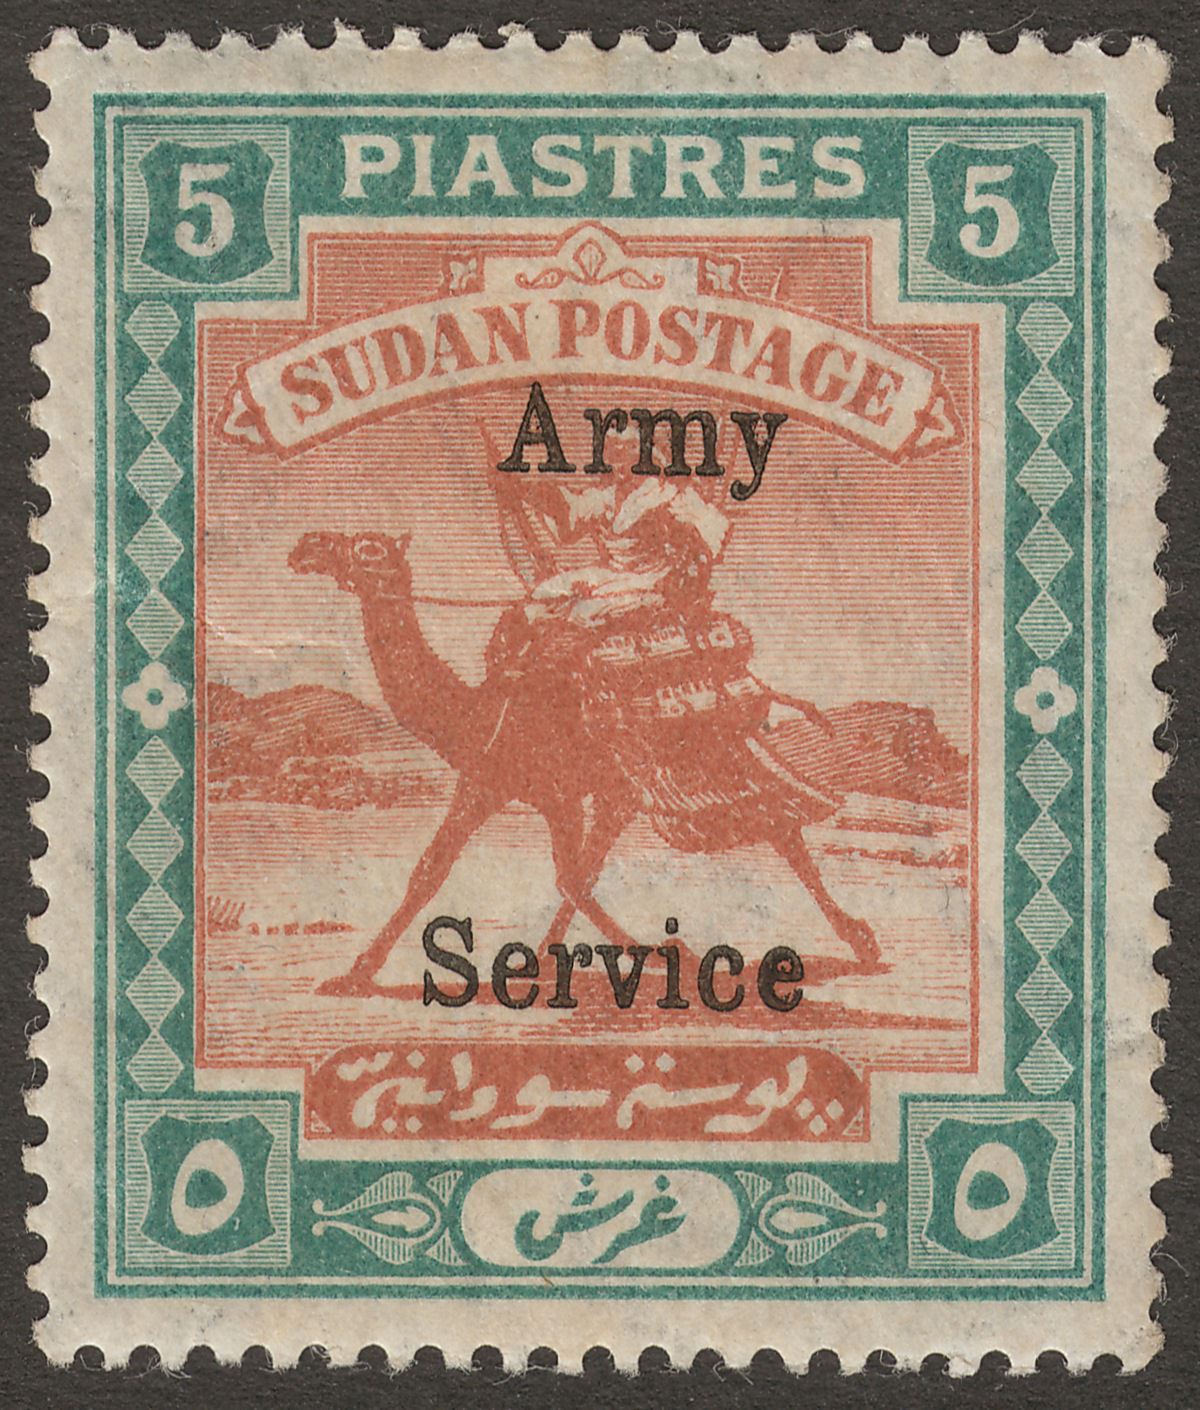 Sudan 1908 KEVII Army Service Overprint 5p Brown and Green Mint SG A12 cat £200